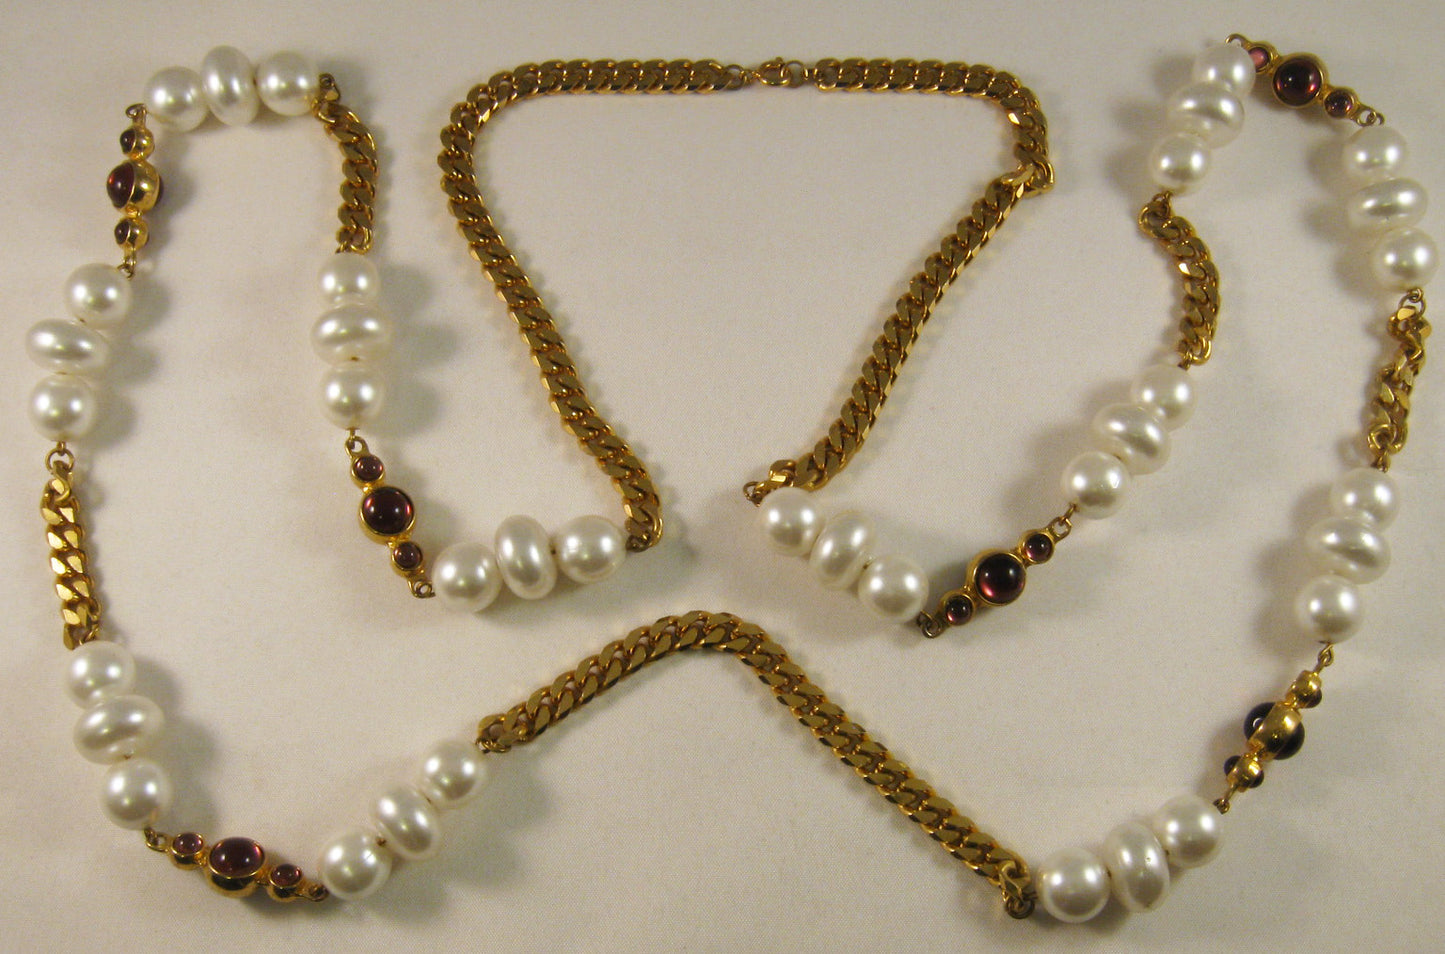 Vintage 46" Beads and Amethyst Bezel-set Stones Necklace on Gold-tone Chain